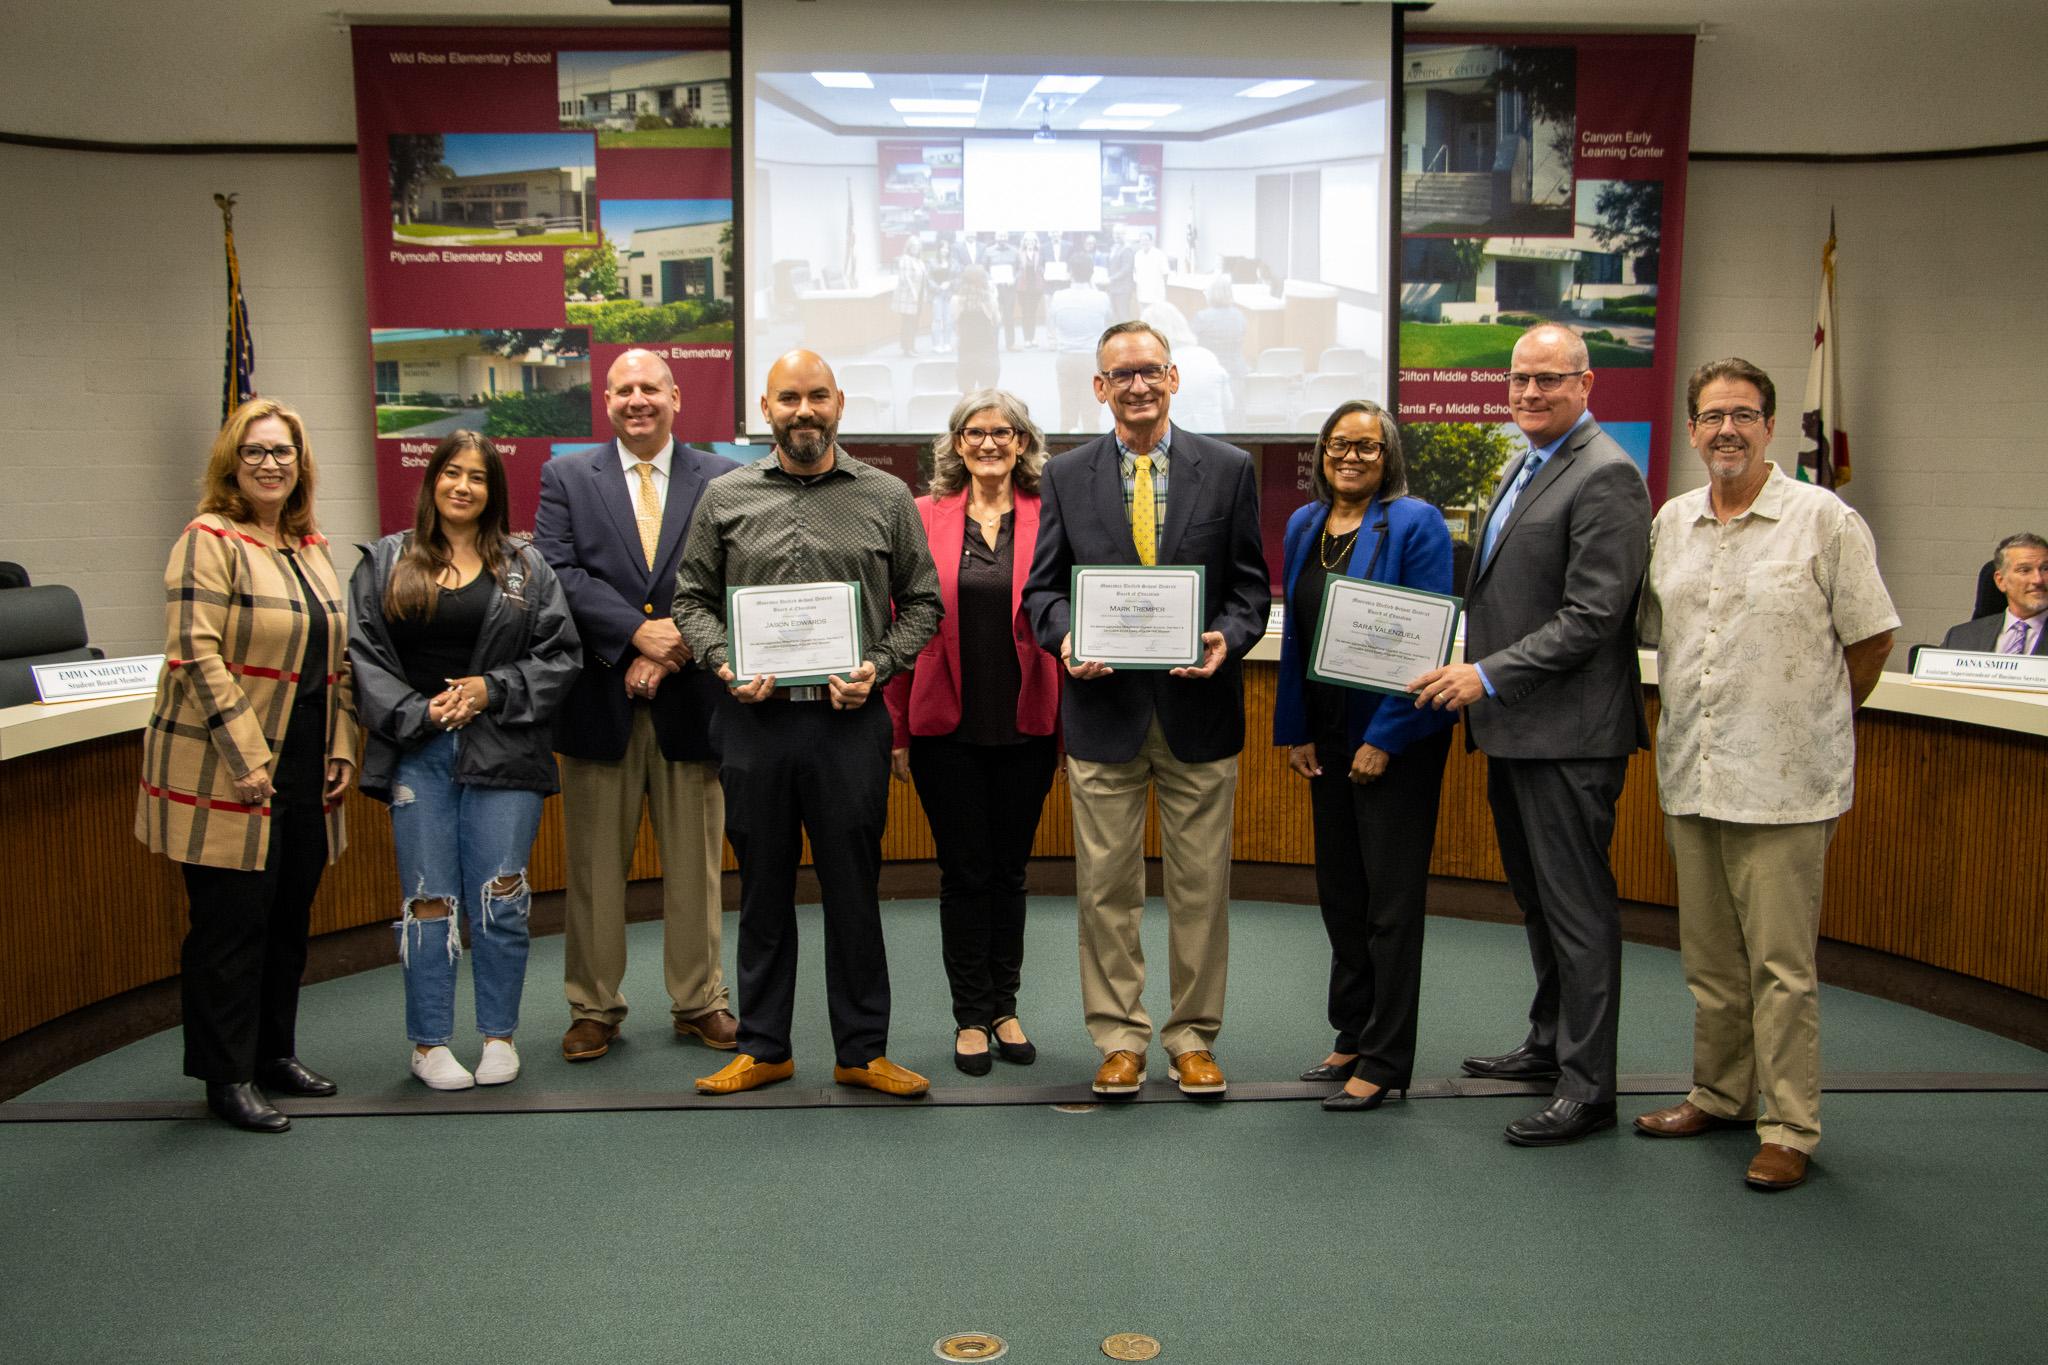 The Board of Education & the Chamber of Commerce congratulated the following employees on being named Monrovia Unified School District's "Employees of the Month" for October.